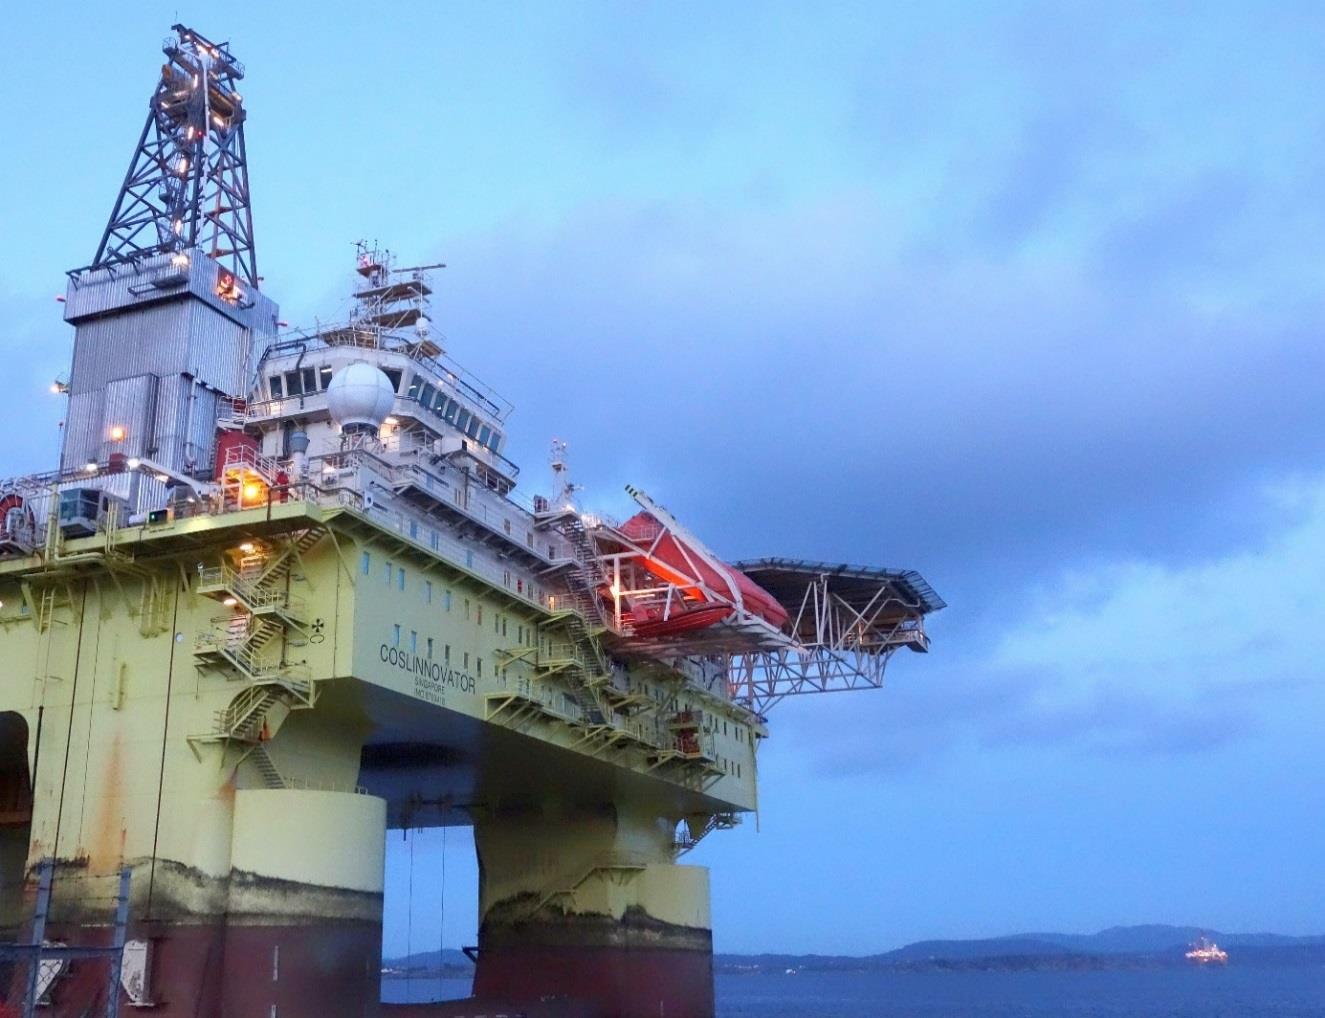 COSLInnovator rig drilled the North Sea wells for Harbour Energy